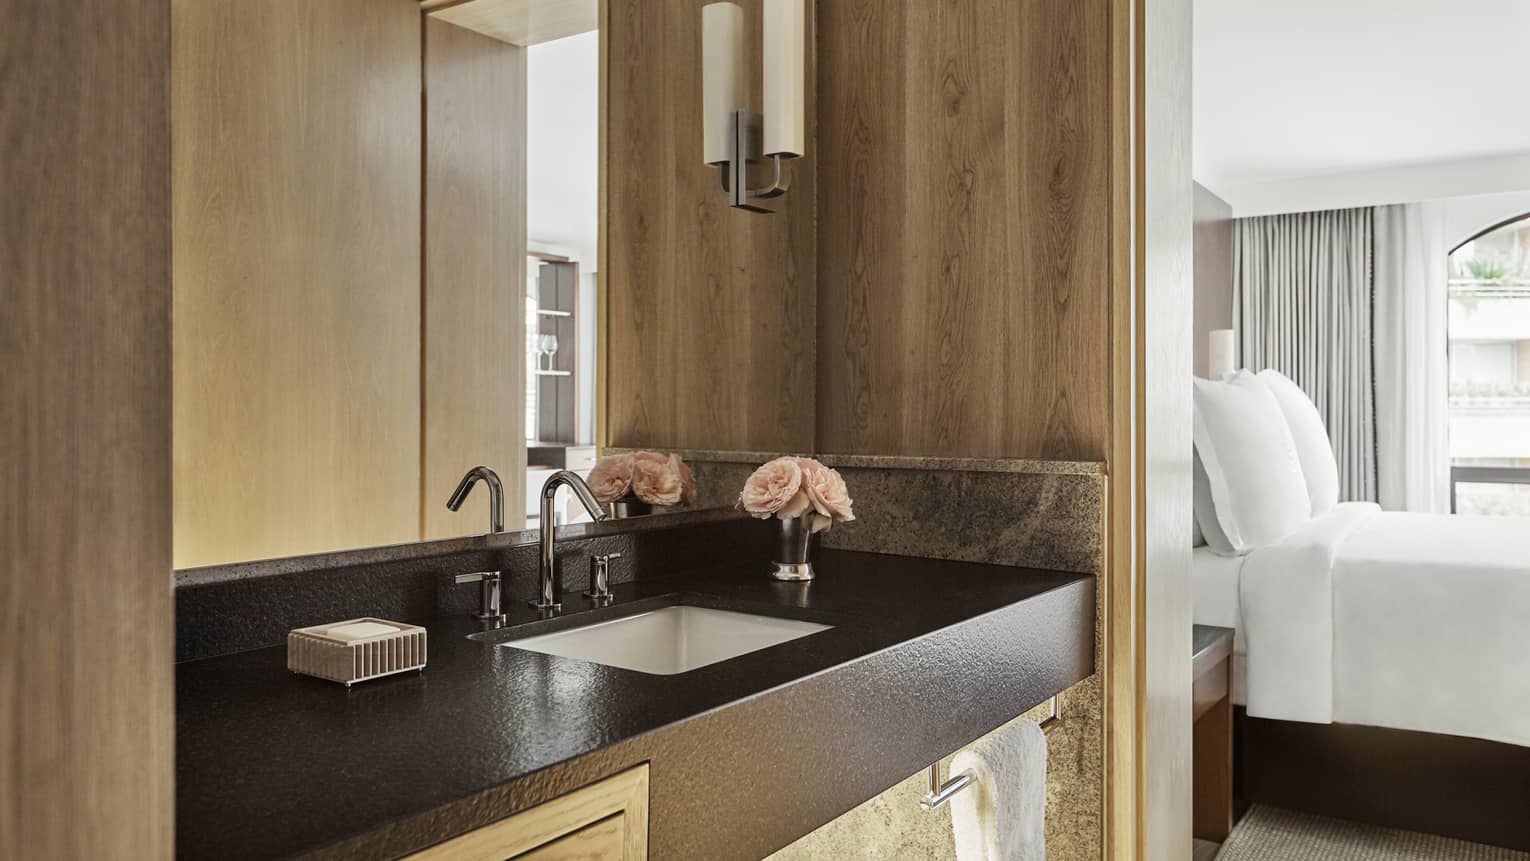 Close-up of bathroom vanity with black counter, sink, wood walls, bedroom visible to side